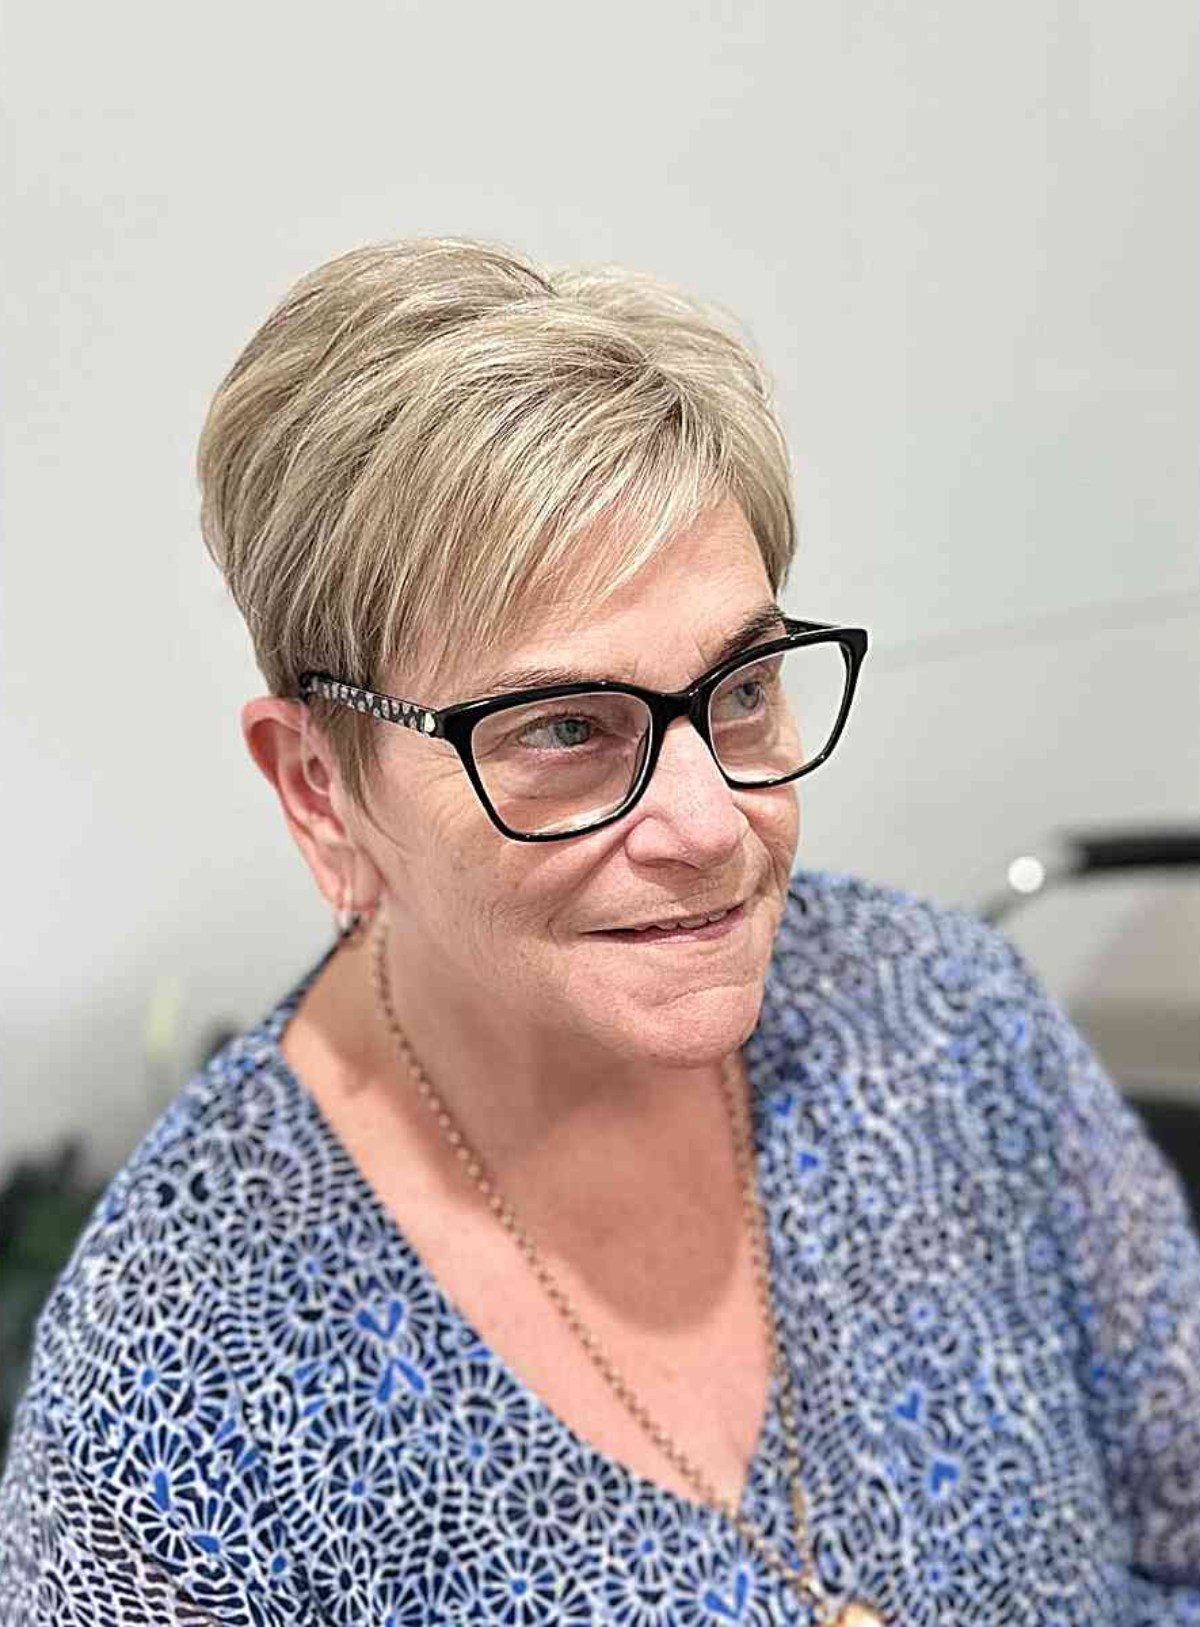 Very Short Pixie Hair with Side-Swept Bangs for Women Aged 50 with Glasses